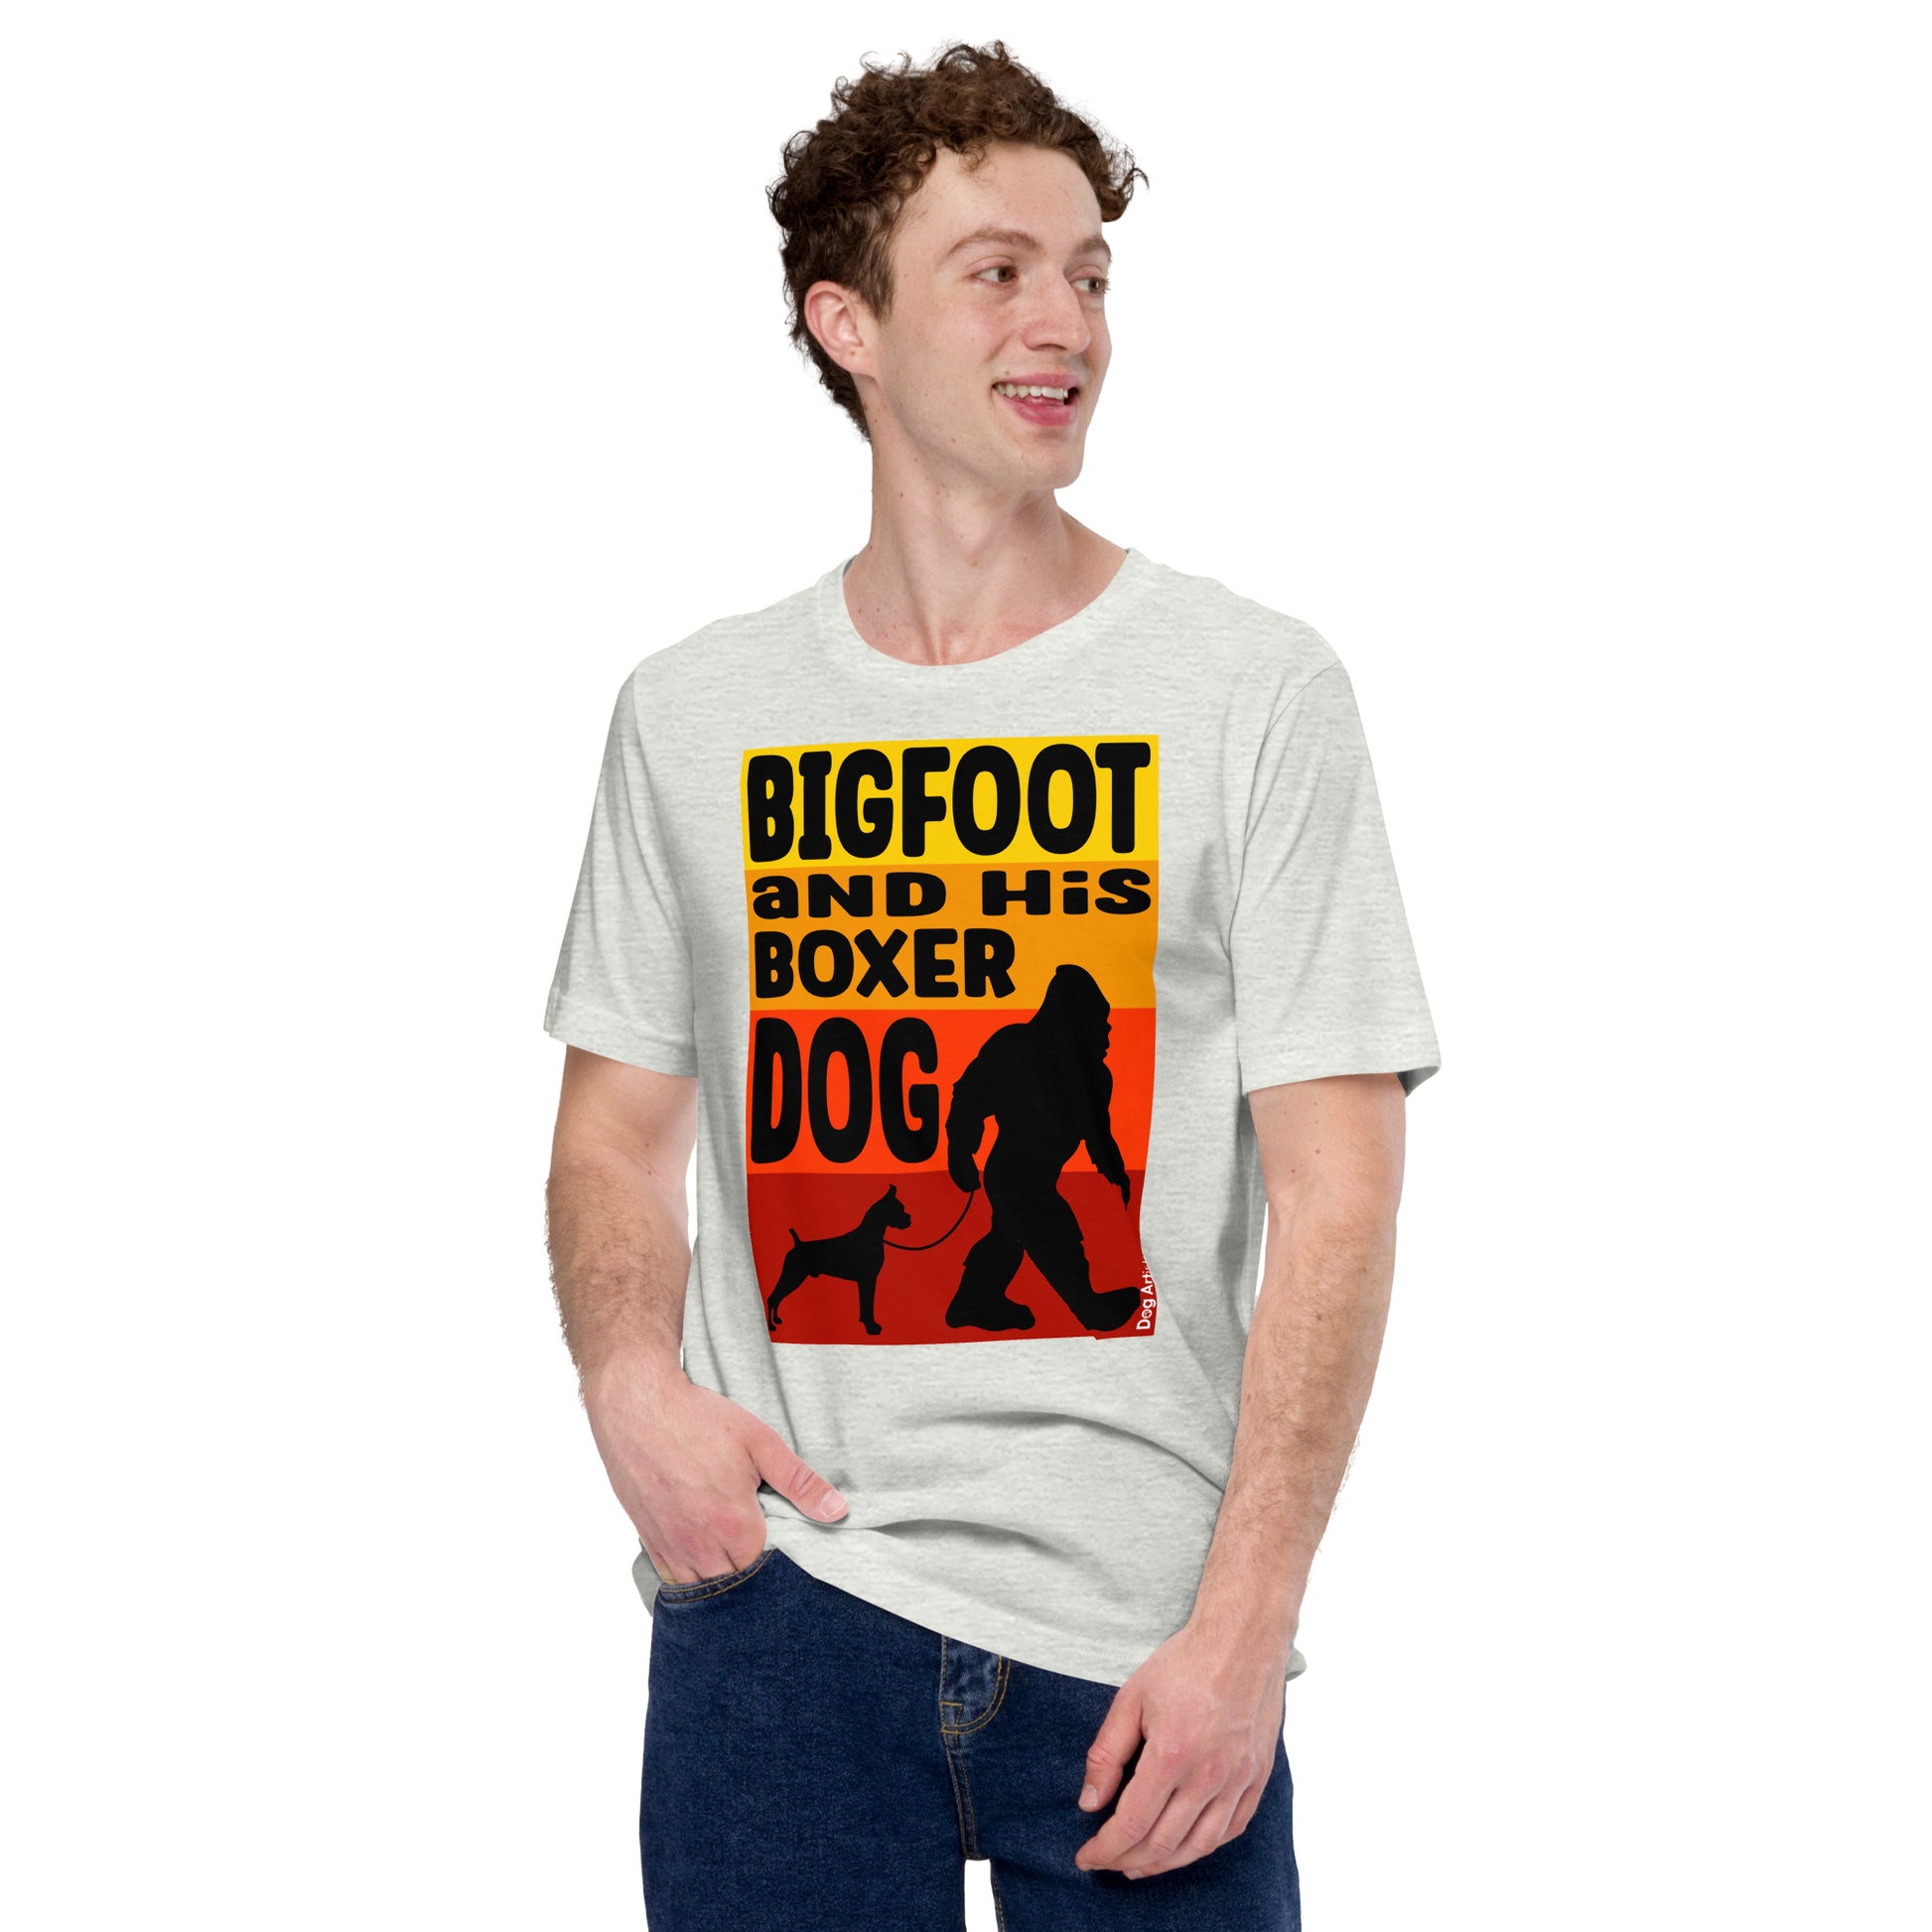 Big foot and his Boxer dog unisex ash t-shirt by Dog Artistry.